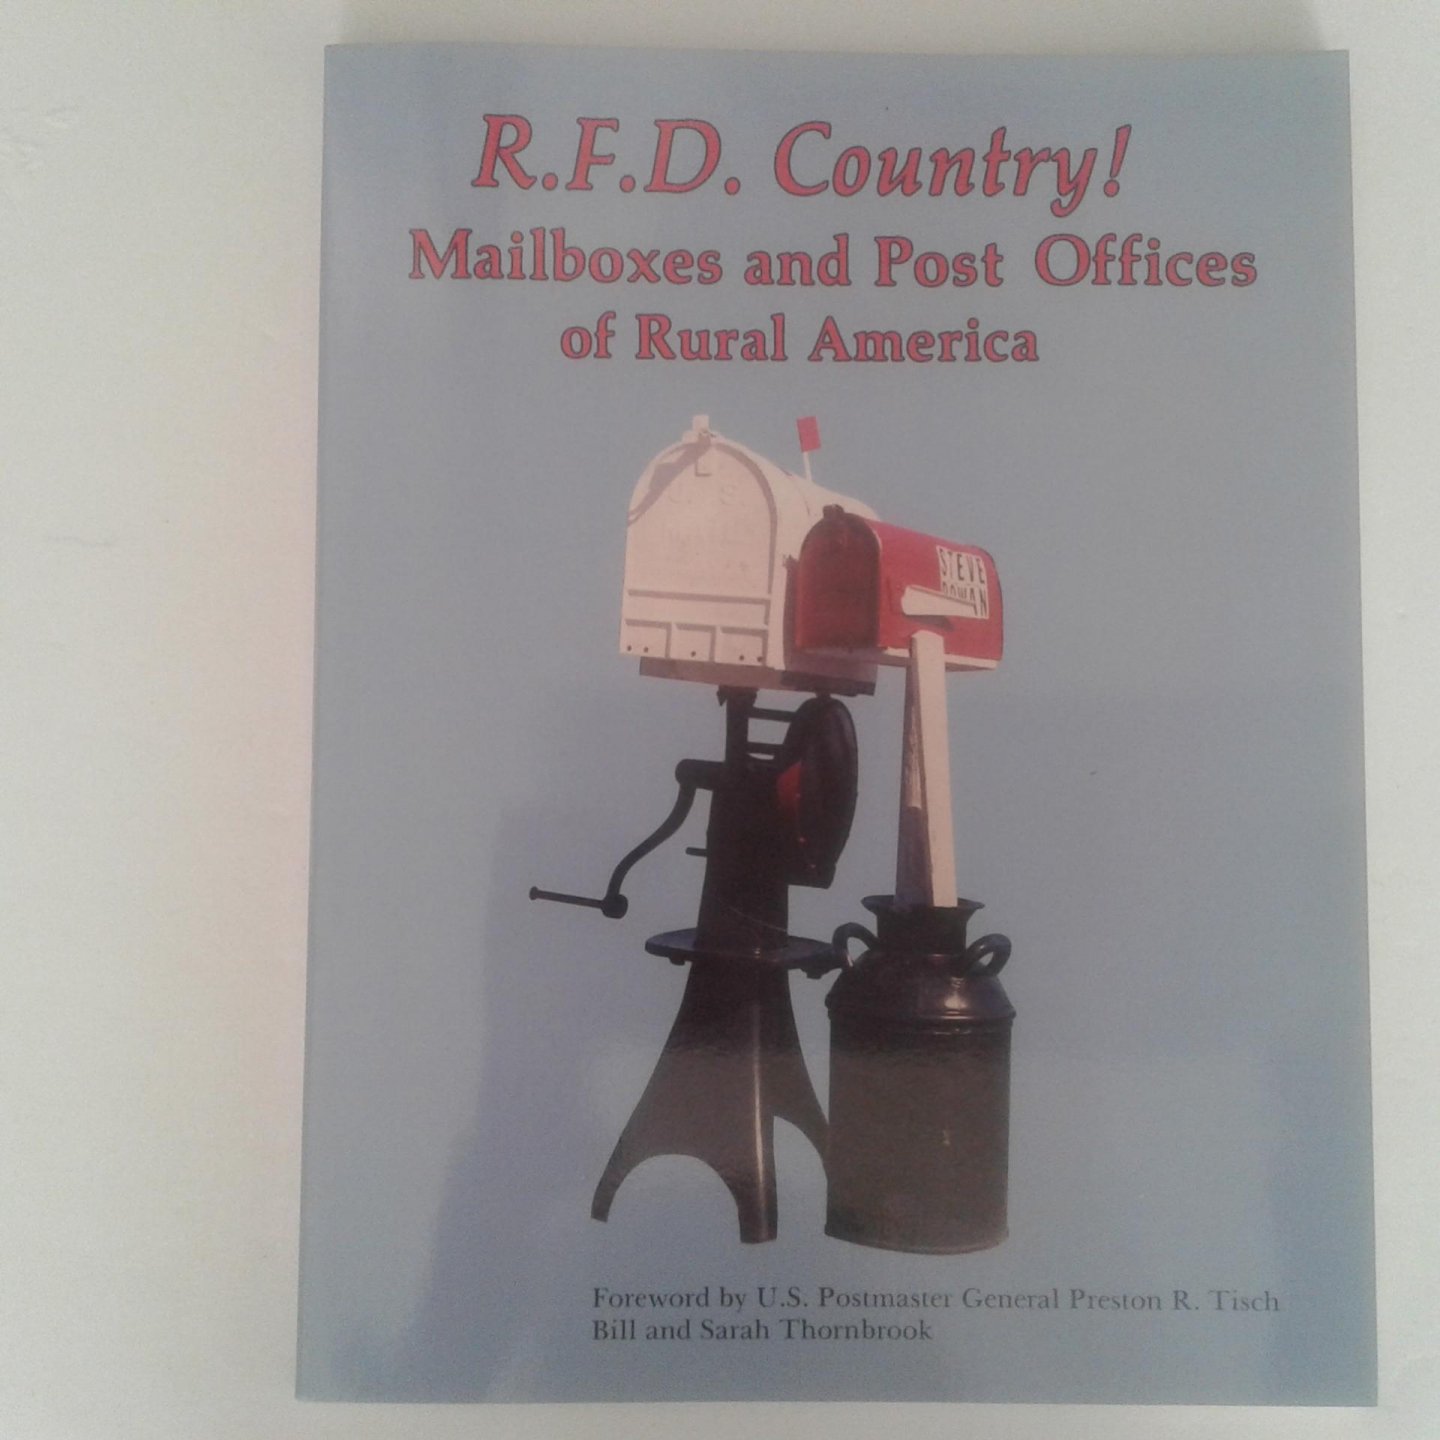  - R.F.D Country ; Mailboxes and Post Offices of Rural America